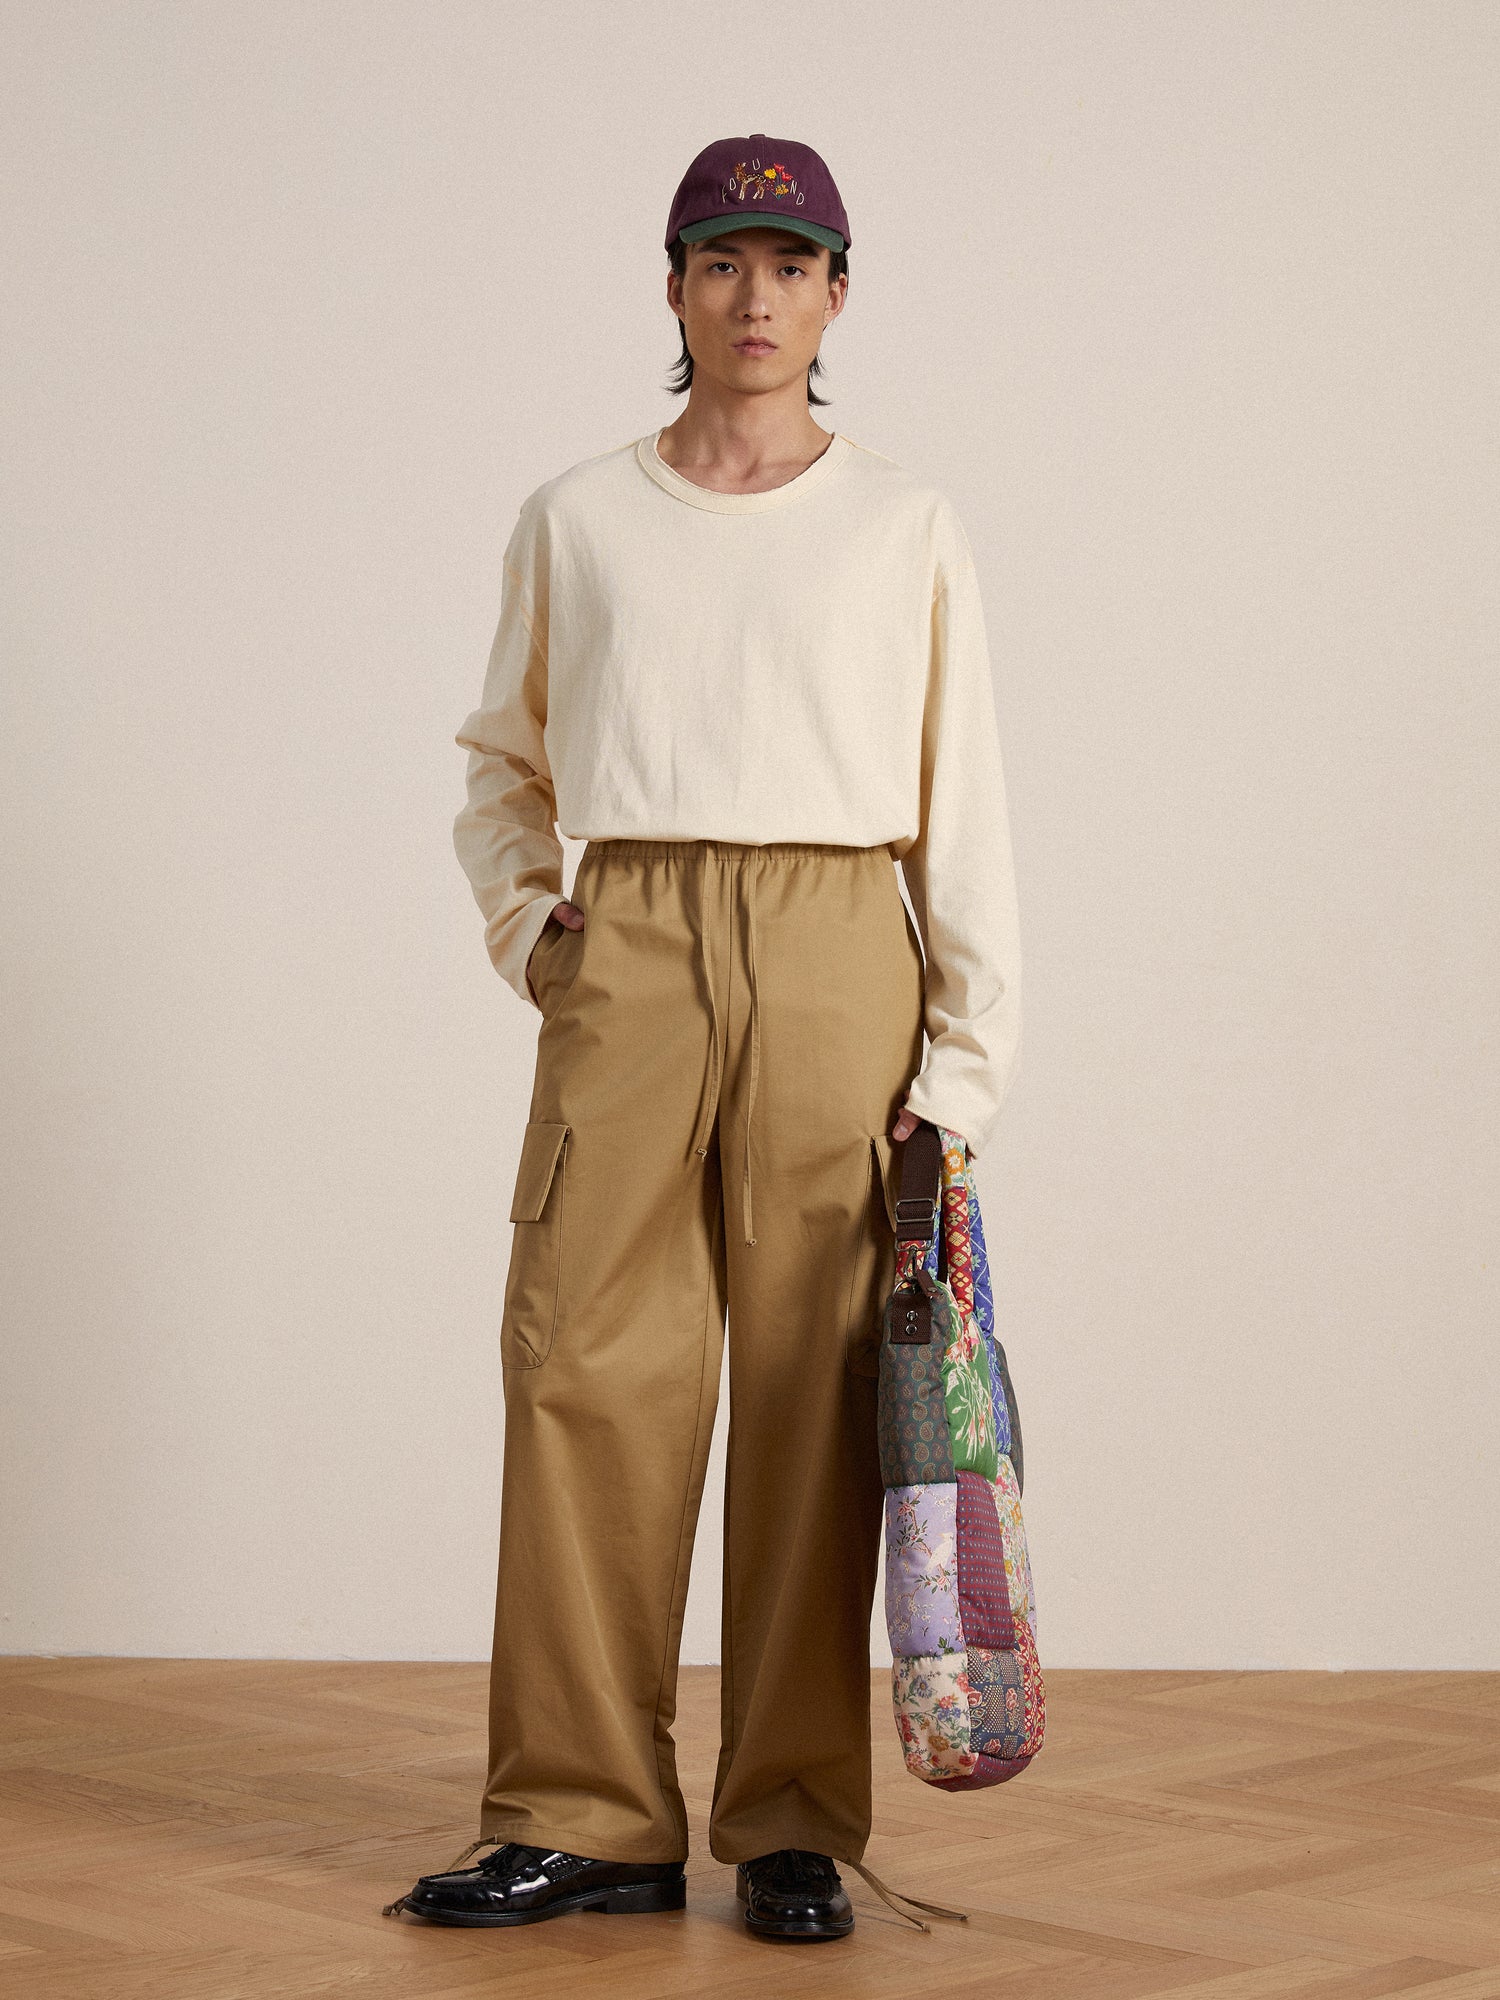 A man in a tan shirt and Found Twill Cargo Drawstring Pants made of lightweight fabric holding a bag.